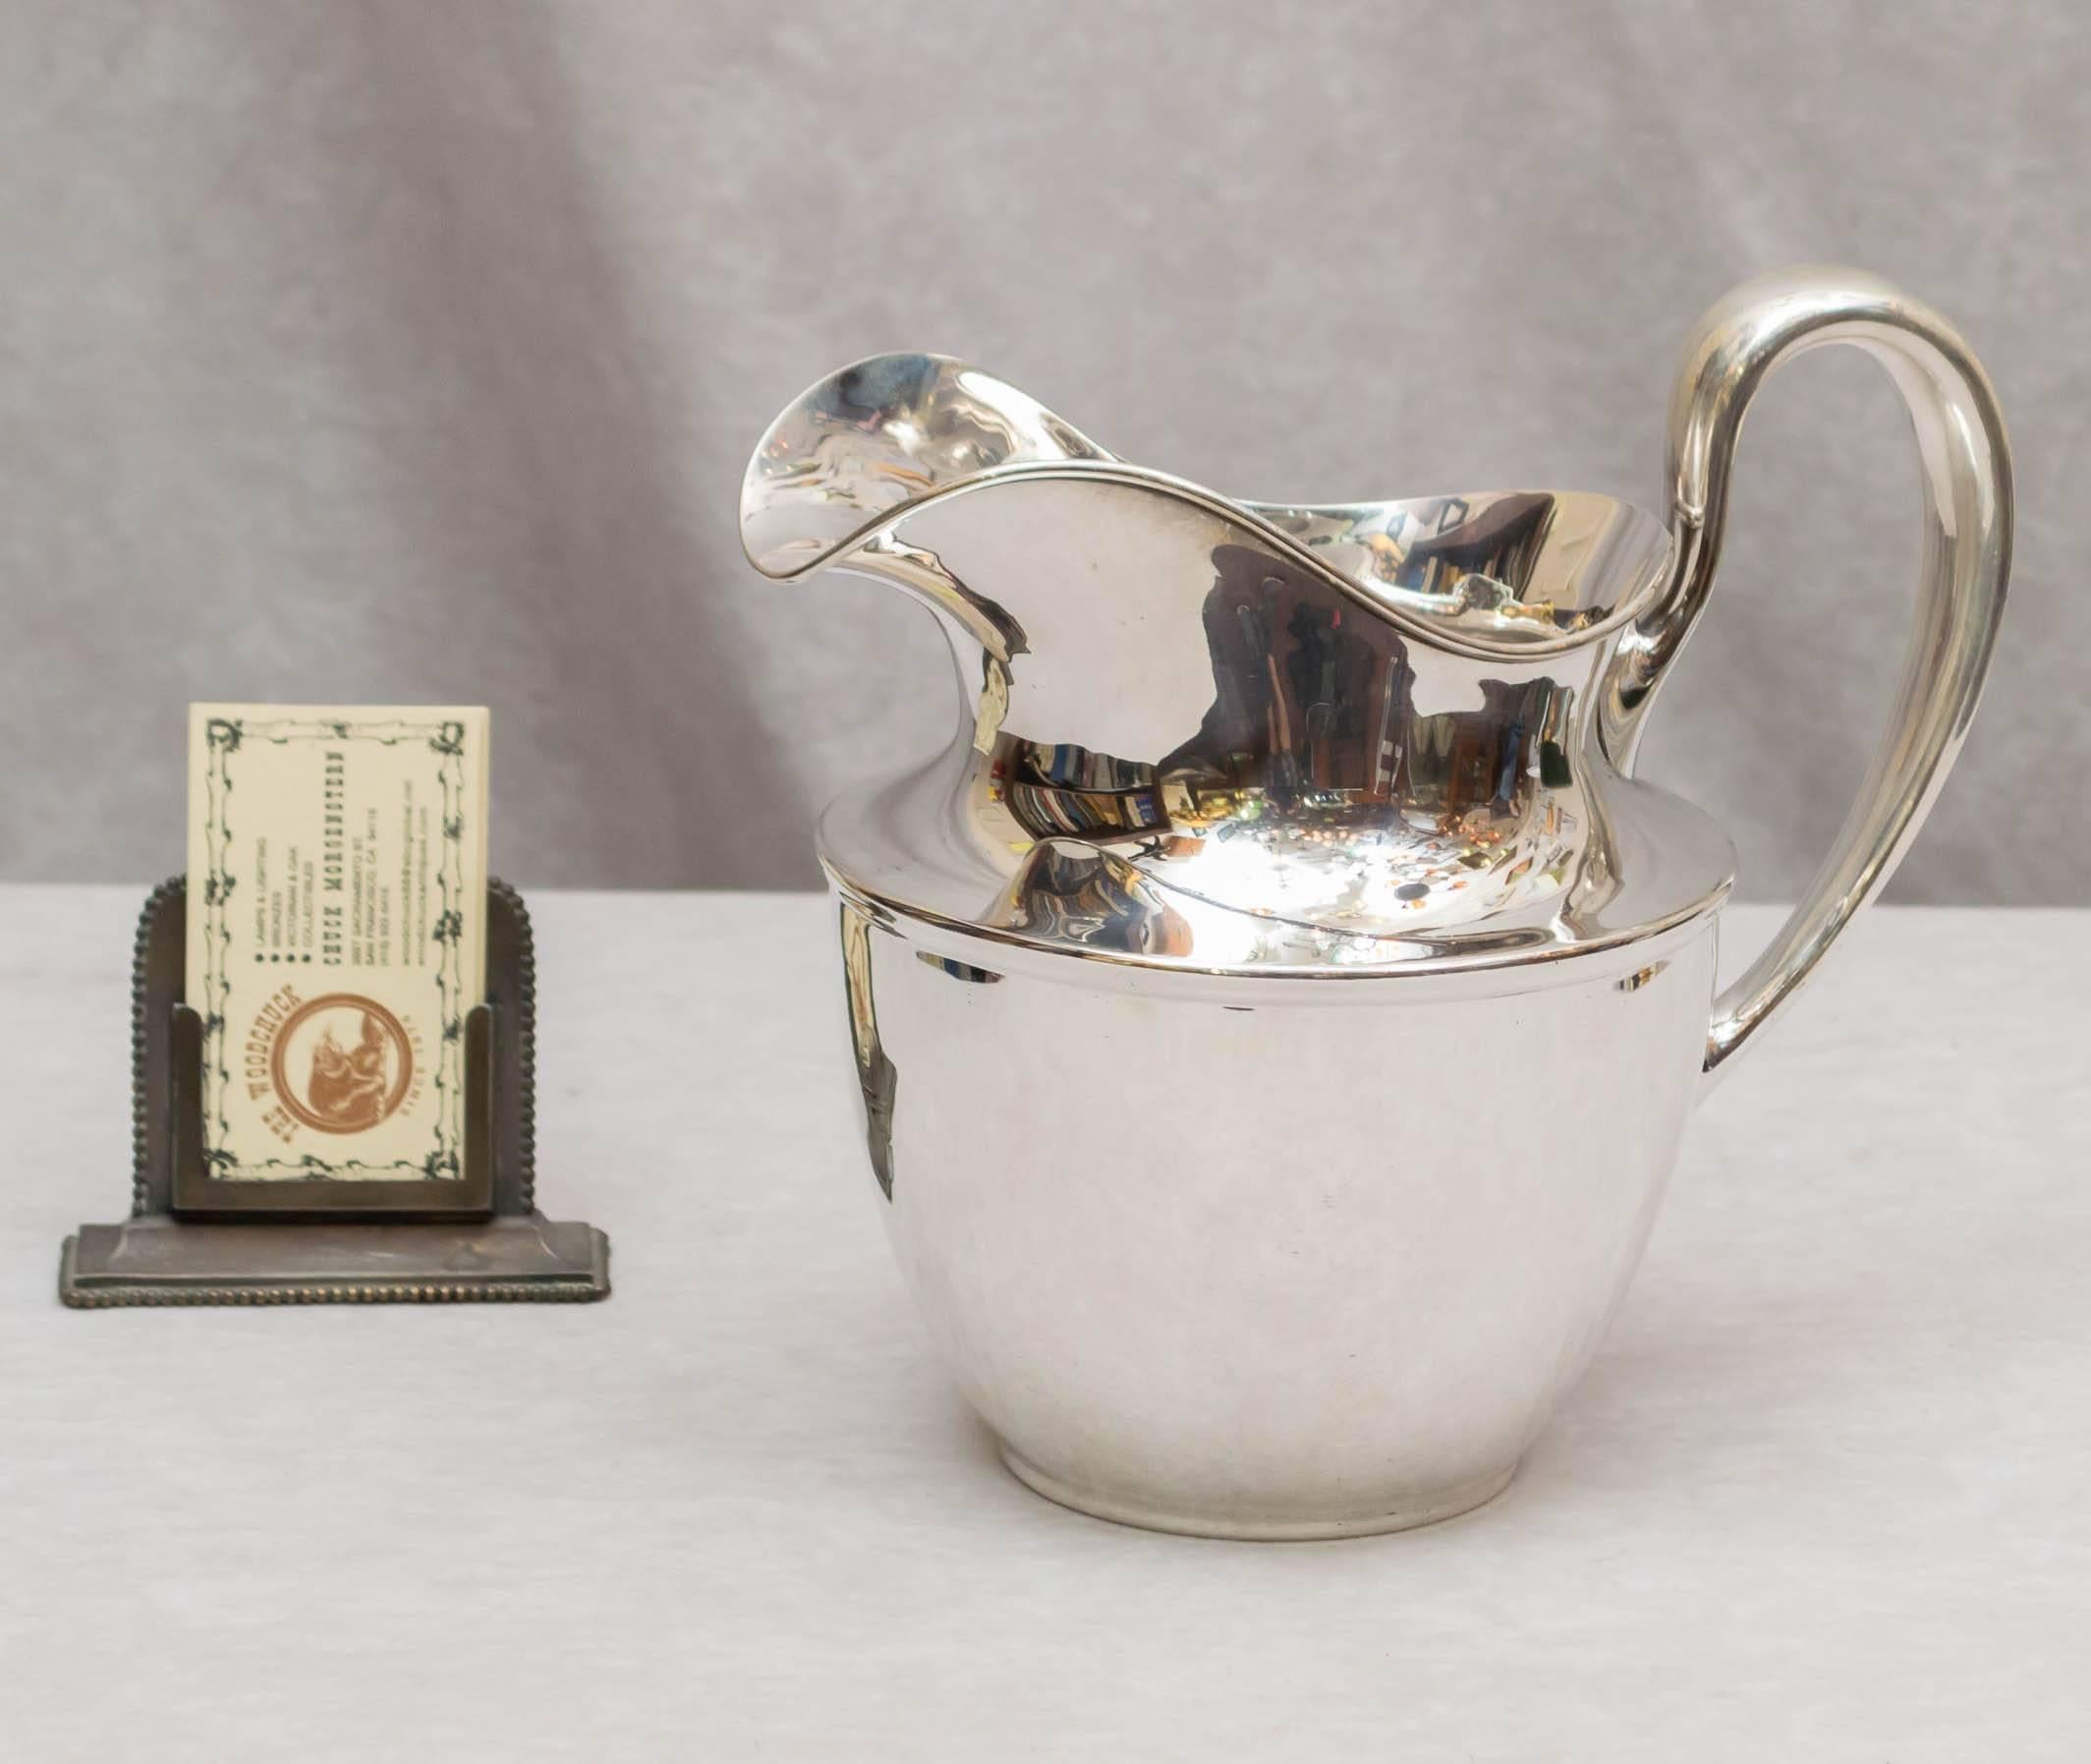 This lovely sterling silver pitcher would make a wonderful wedding gift for some deserving couple. It is marked as described above. Shreve & Co. San Francisco, Sterling, January 4, 1921, 41/2 pints. It weighs 21.03 troy ounces, and is in beautiful